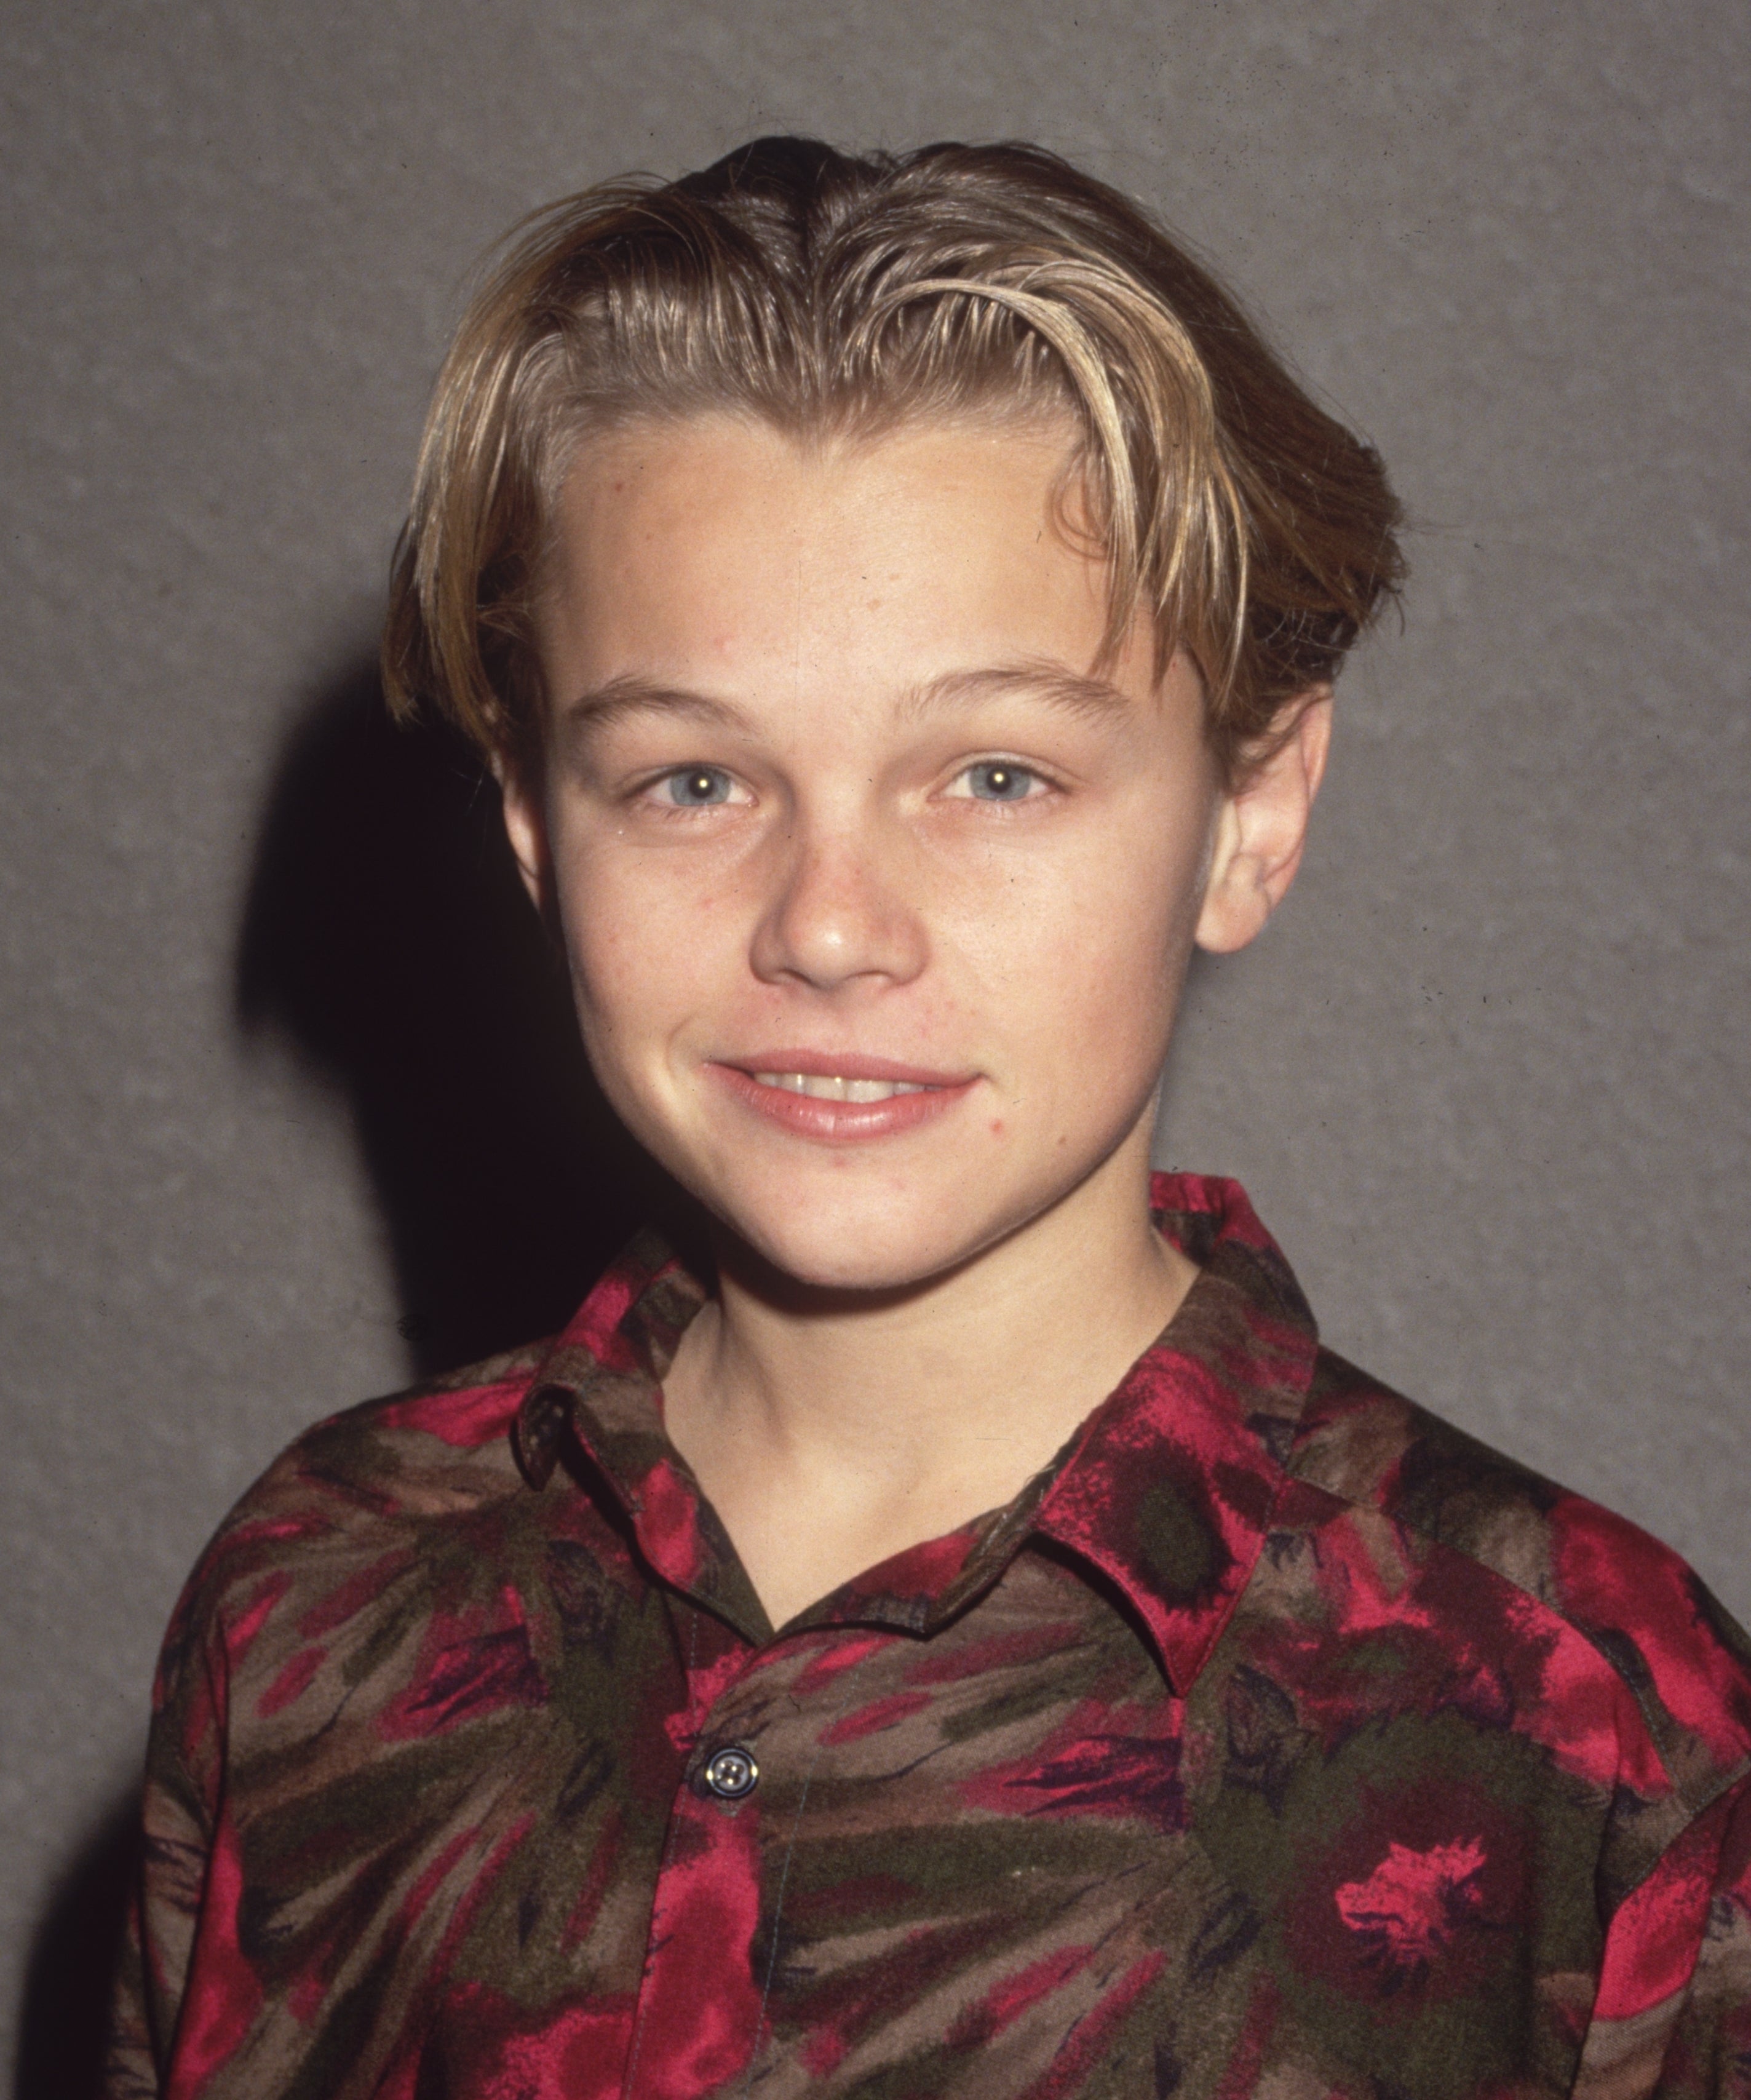 Young Leonardo DiCaprio smiling, wearing a floral patterned shirt